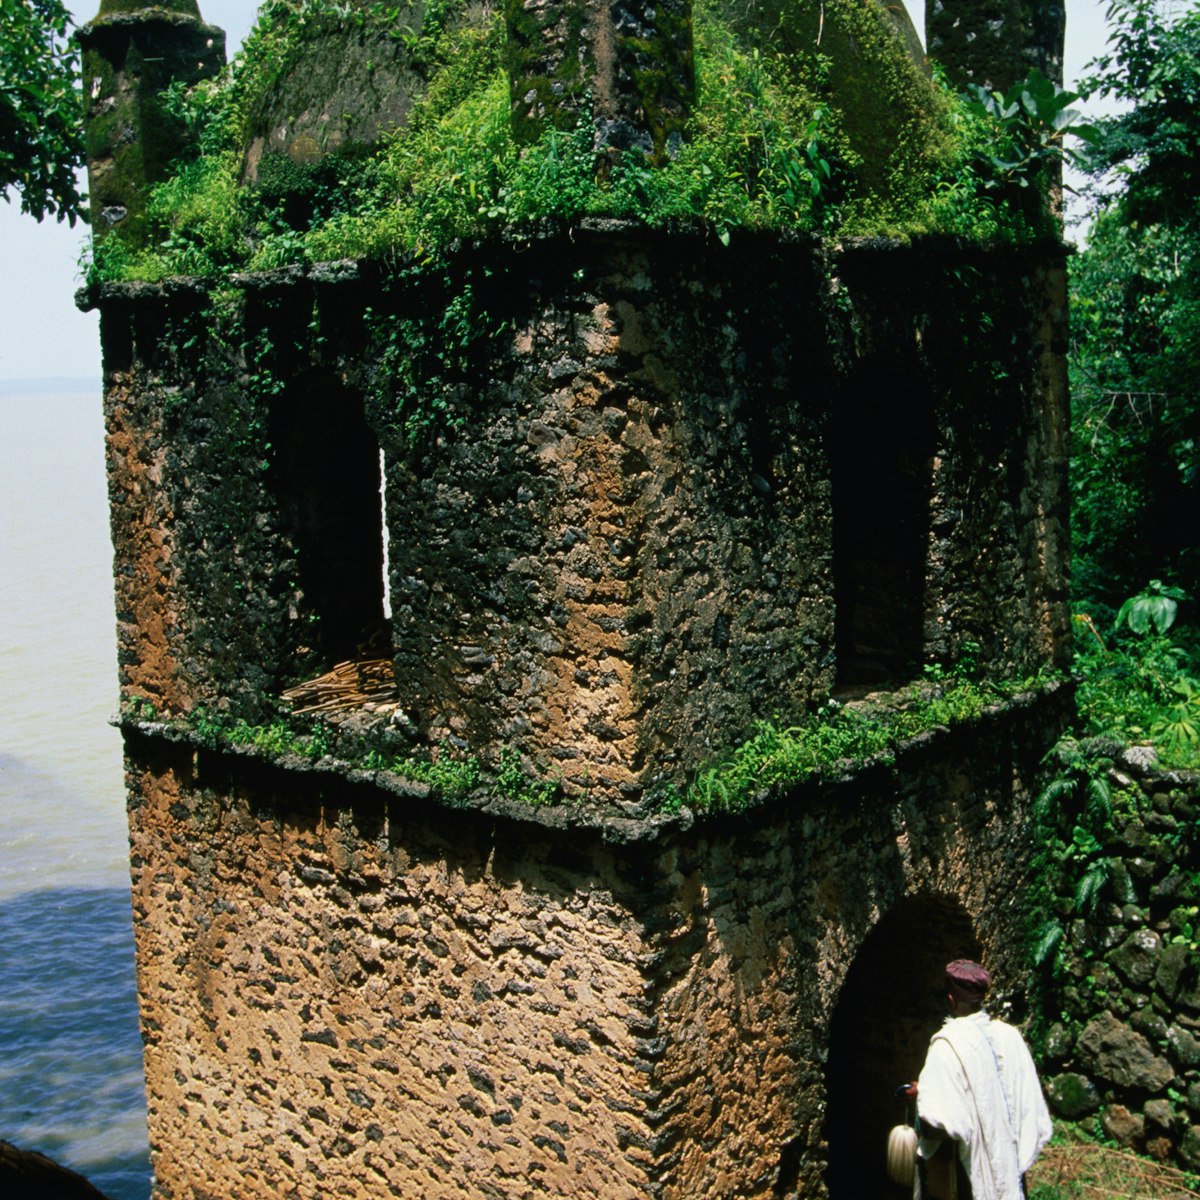 A man entering the grass and moss covered bastion of the island monastery, Narga Selassie, on Lake Tana